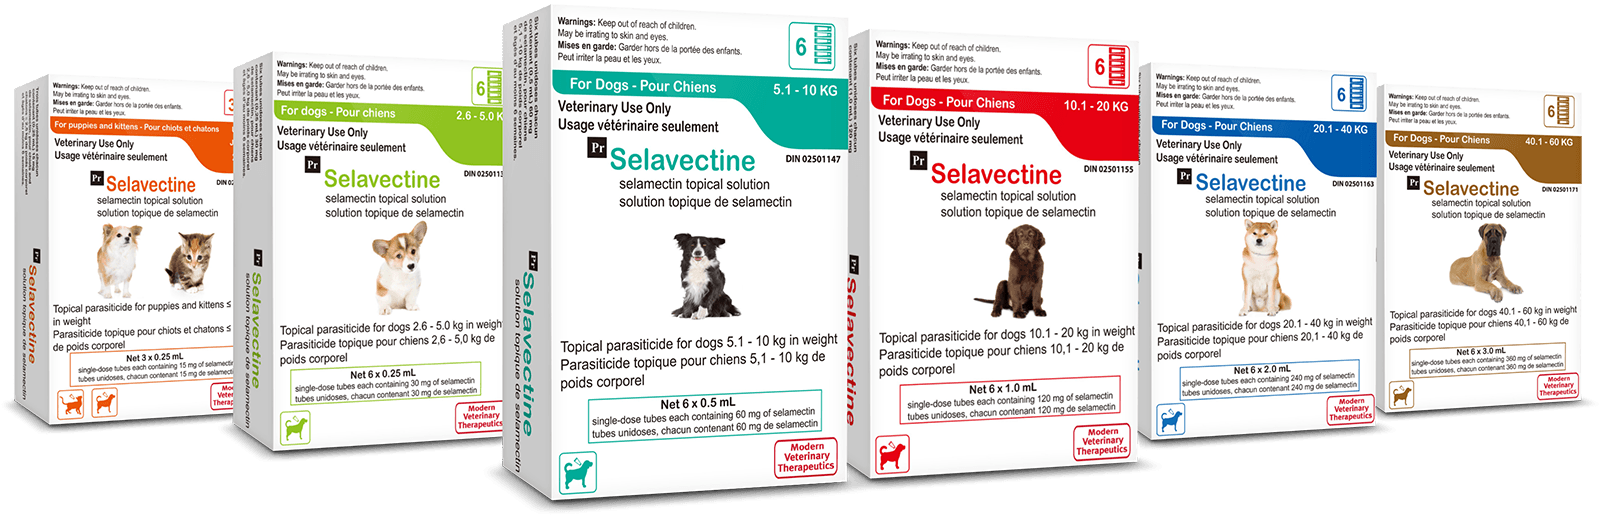 Selavectine line of products